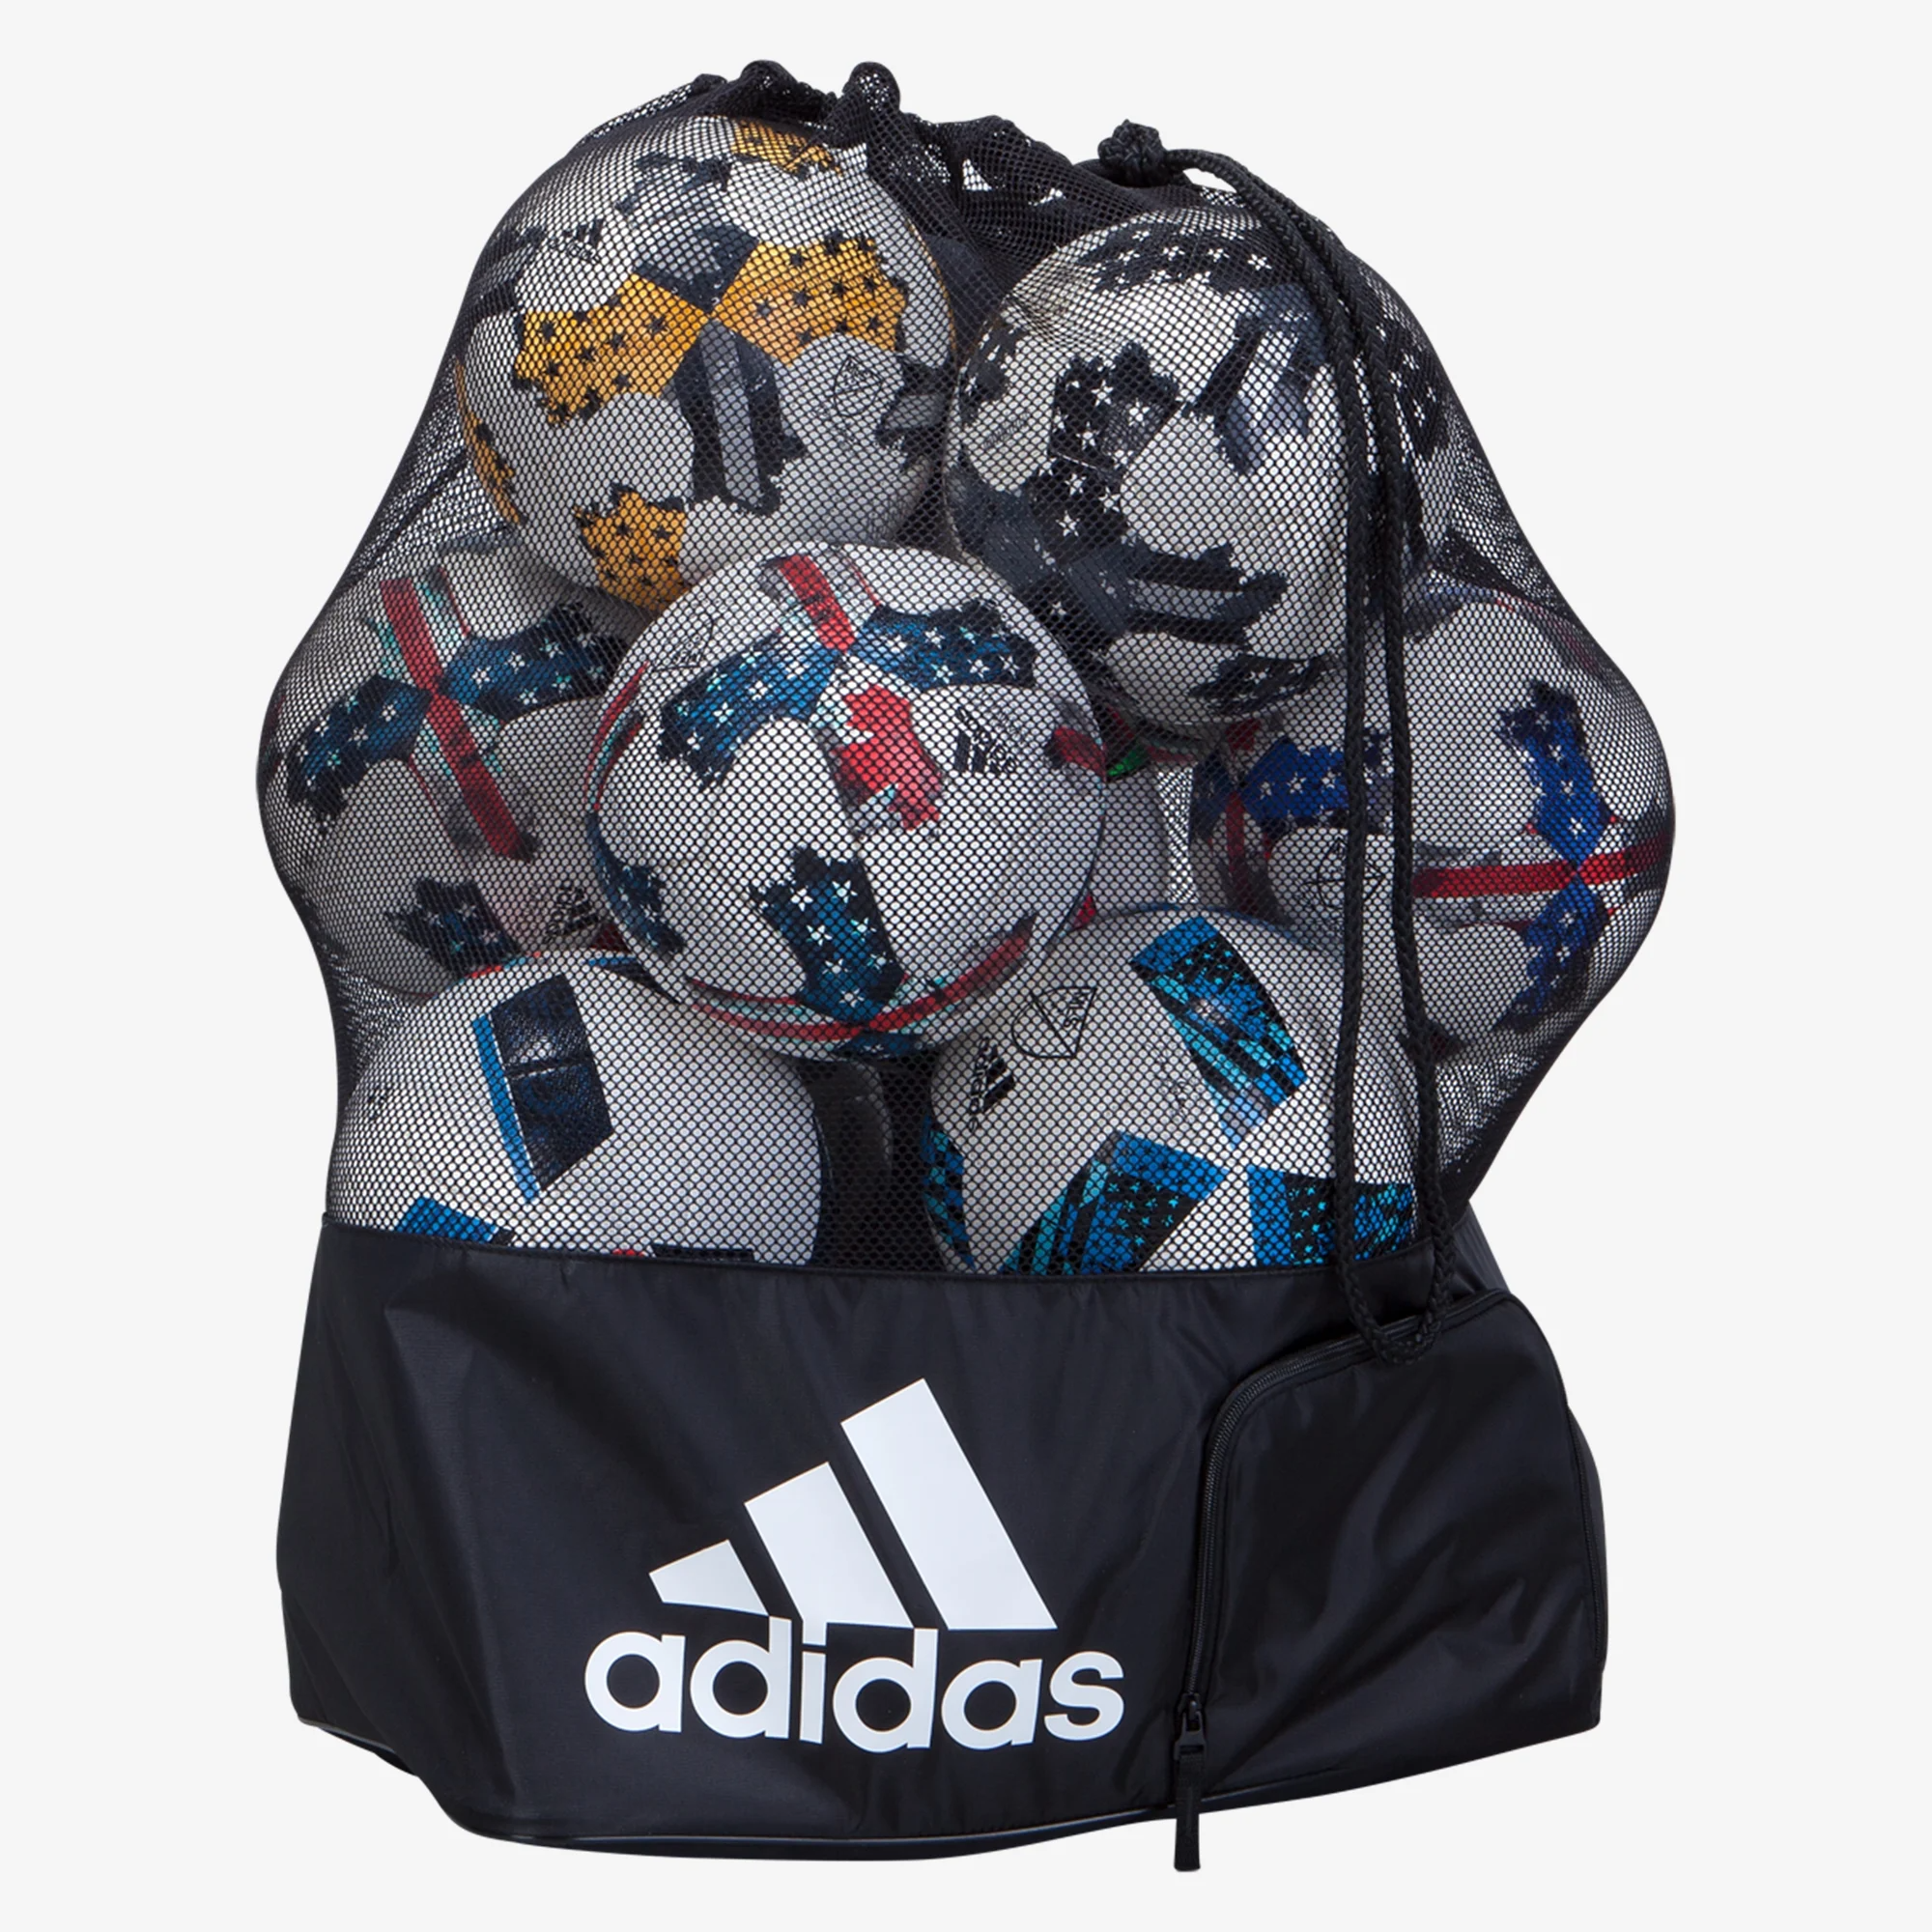 Select Ball Bag with Backpack Straps